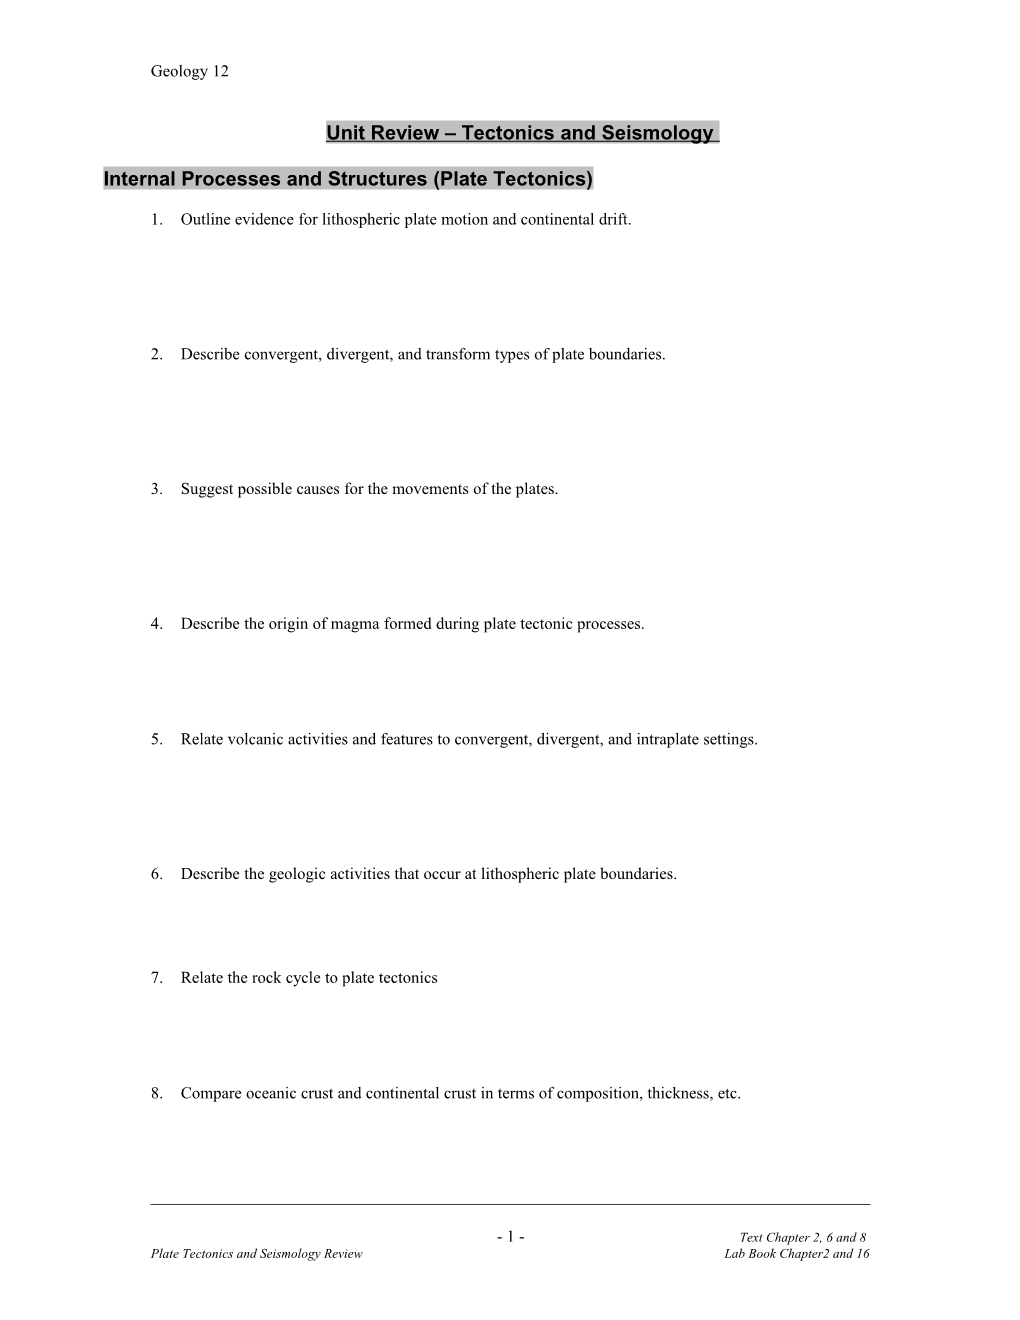 Questions for Section C: Earth Materials (Igneous Rocks and Processes)